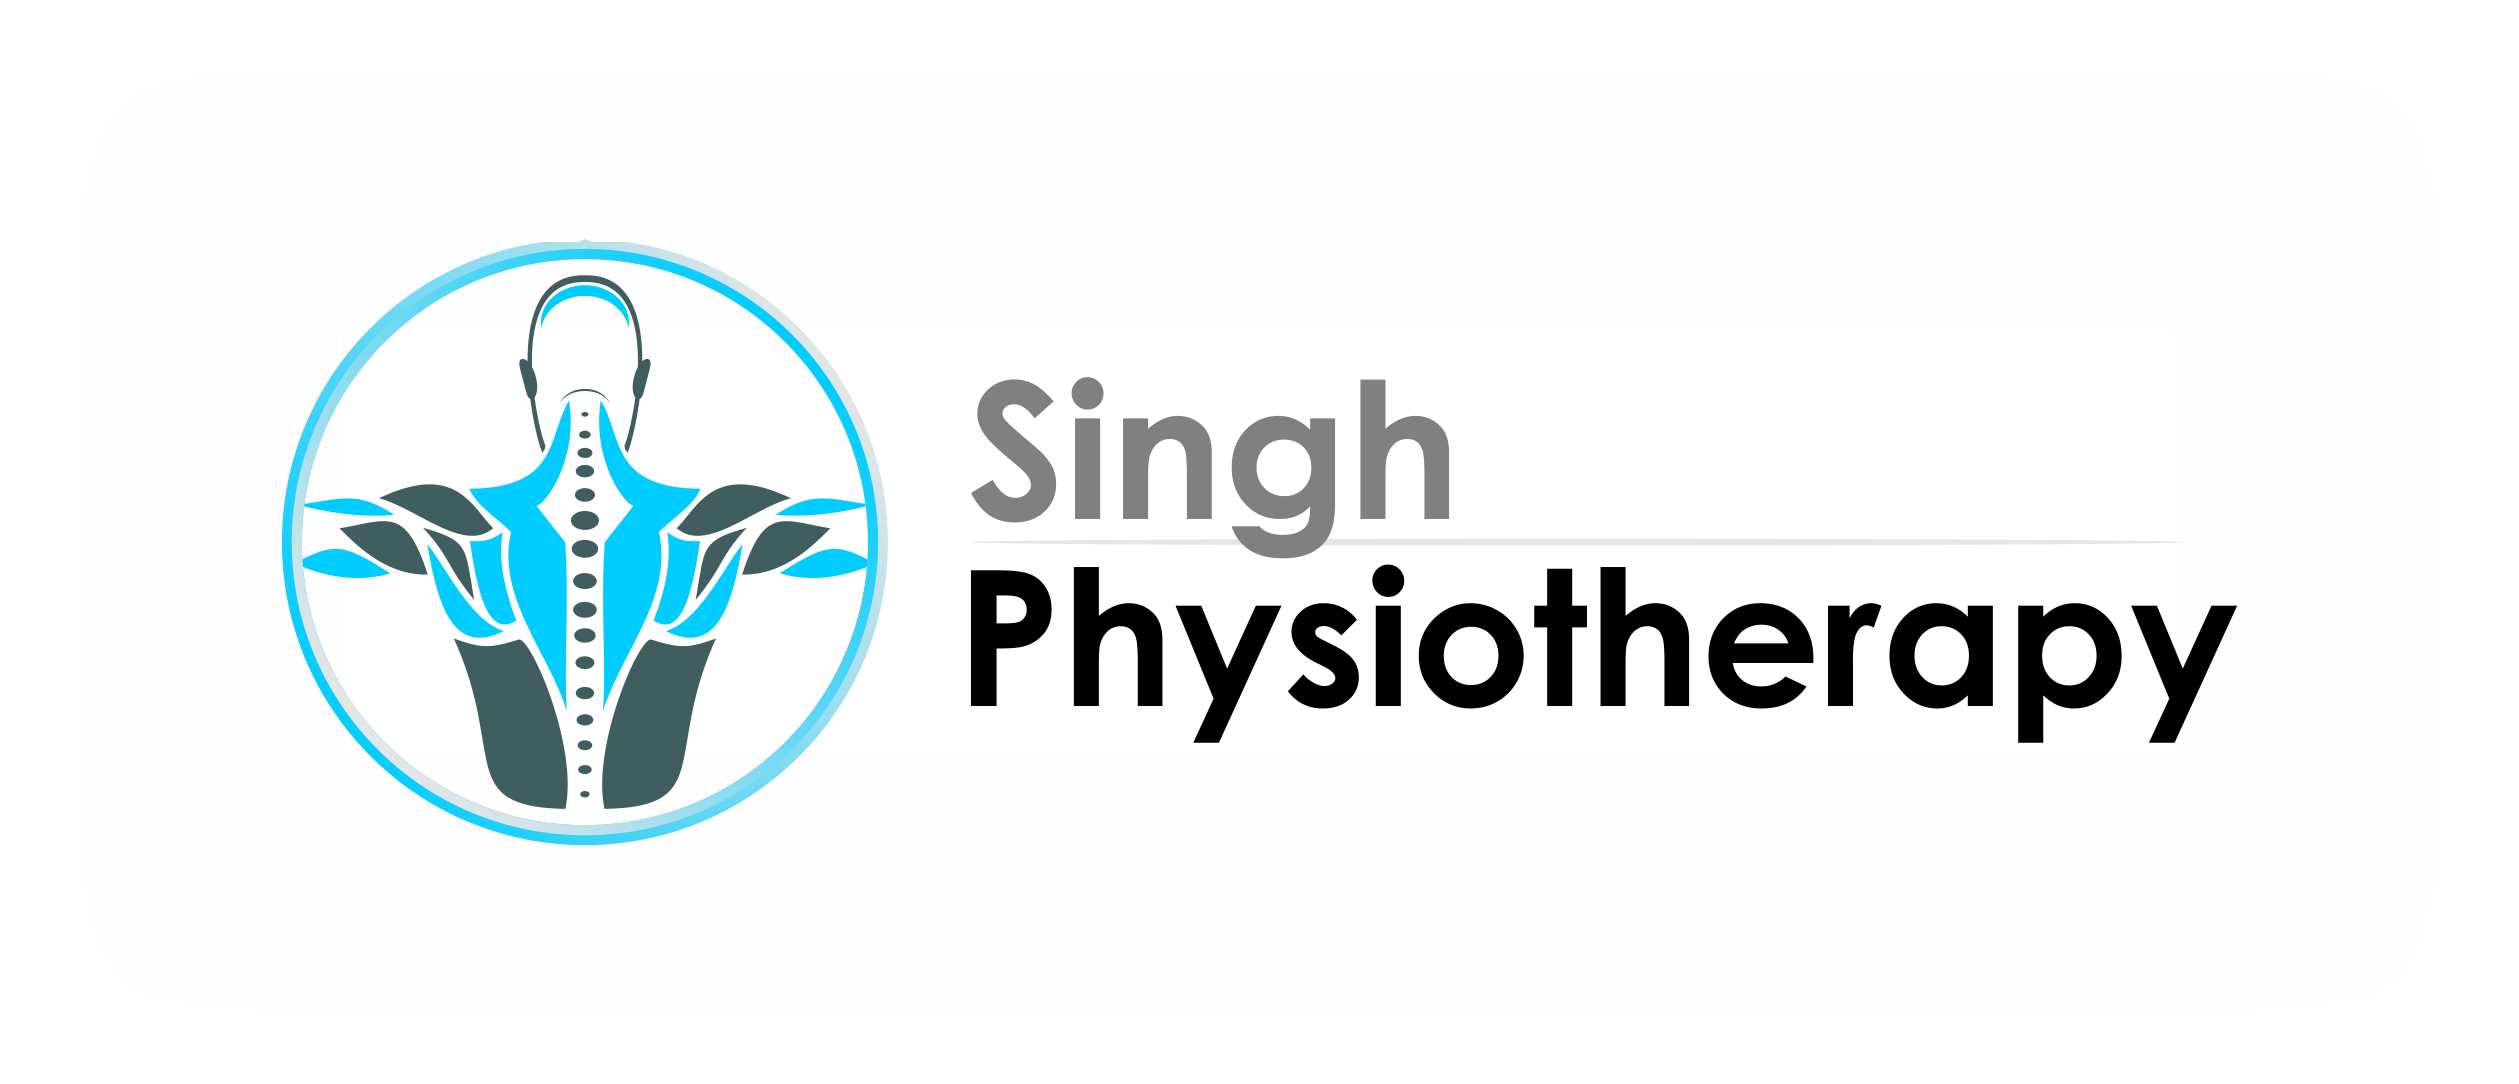 Singh Physiotherapy Logo